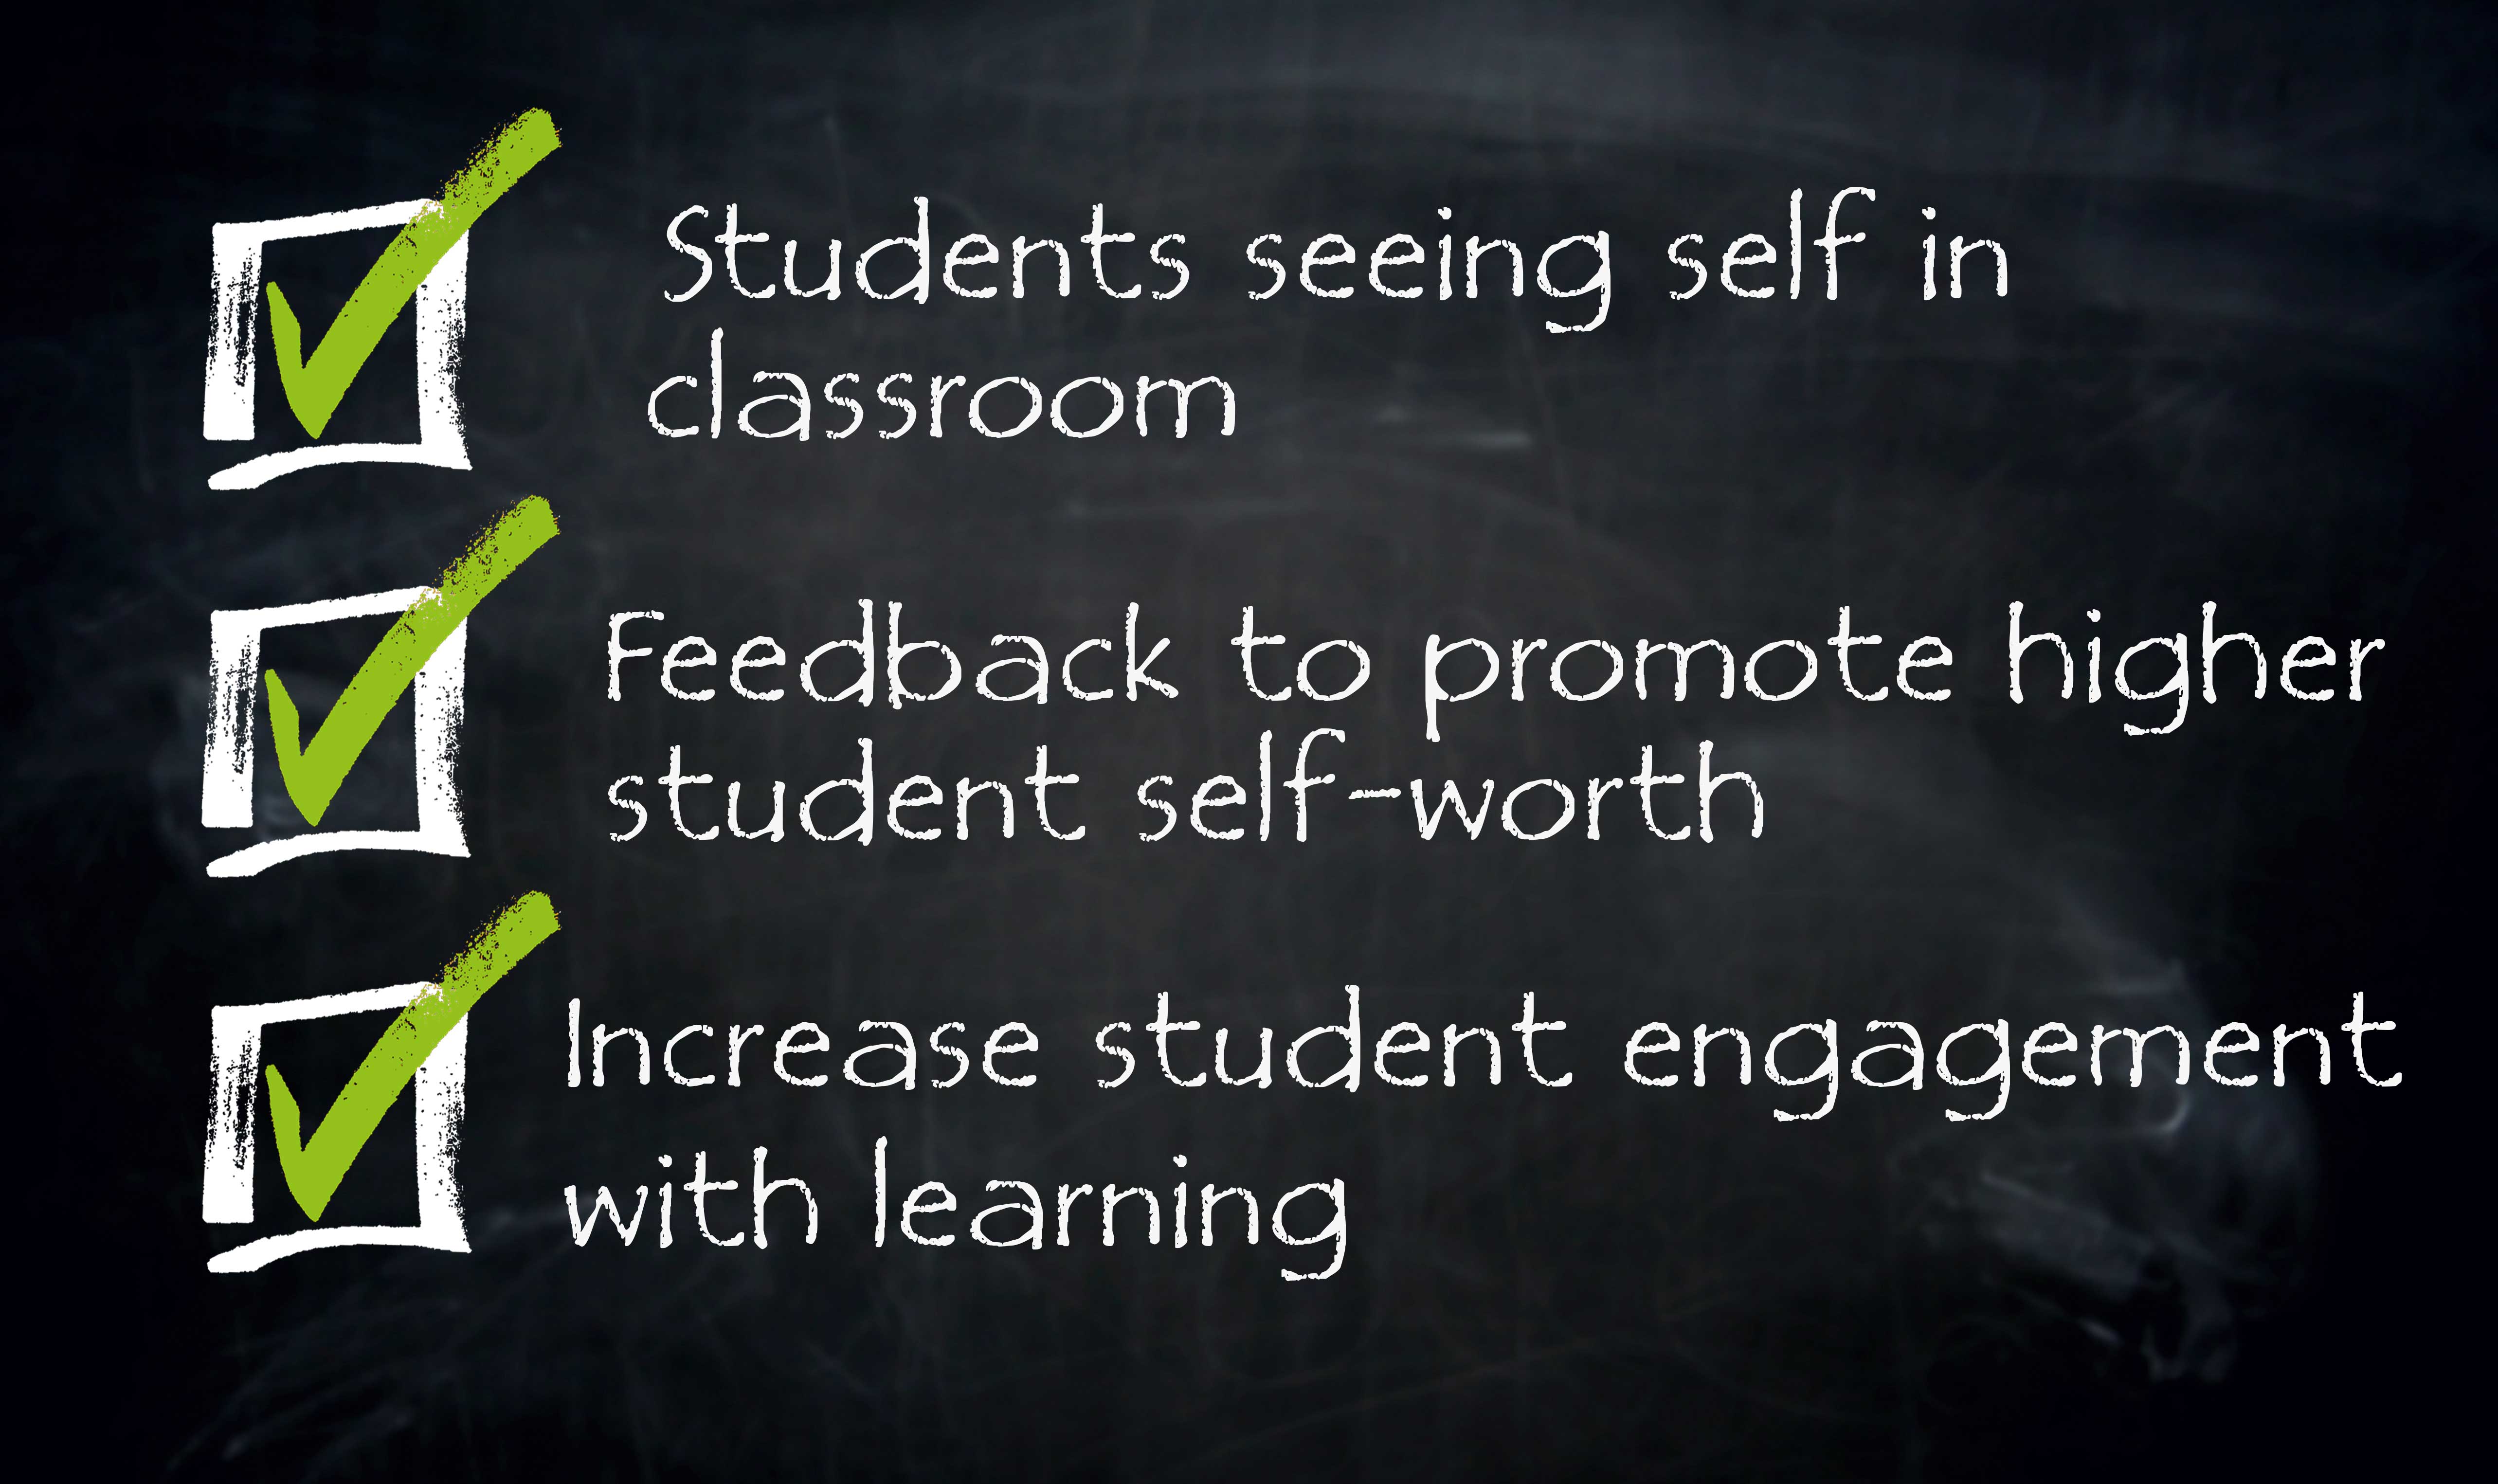 Text on a chalkboard: '1. Students seeing self in classroom  2. Feedback to promote higher student self-worth  3. Increase student engagement with learning '